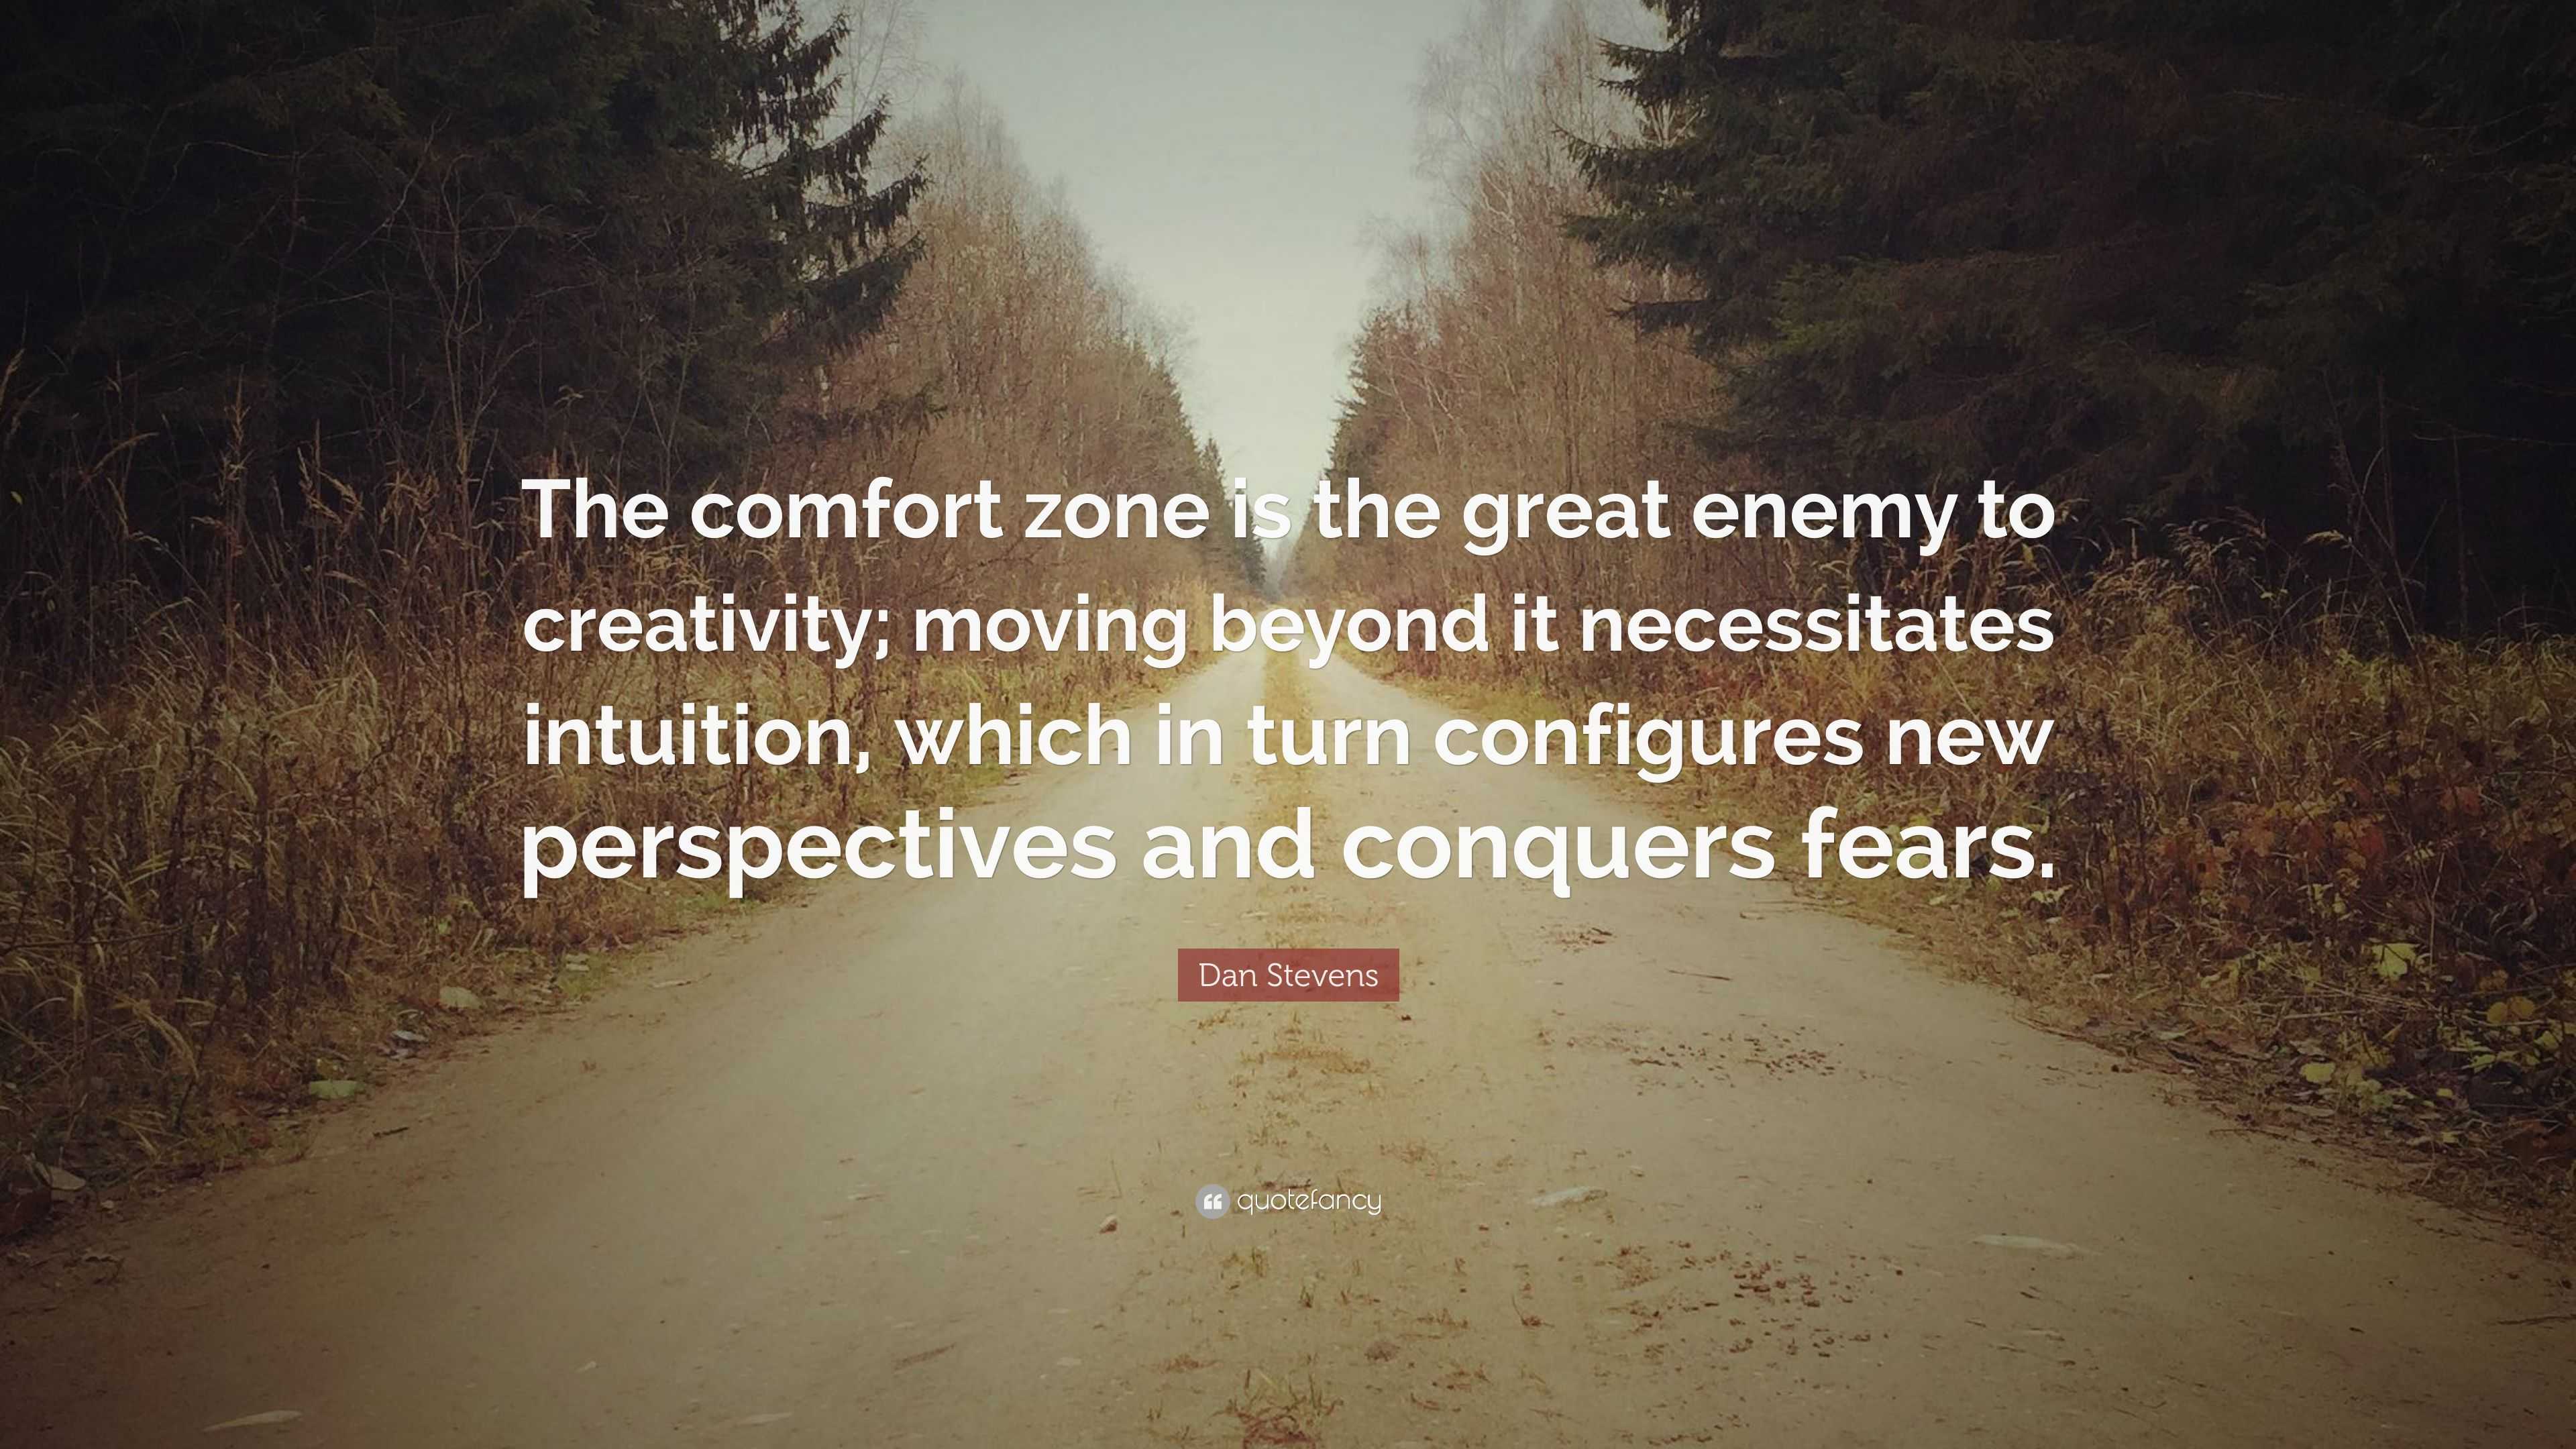 Dan Stevens Quote: "The comfort zone is the great enemy to ...